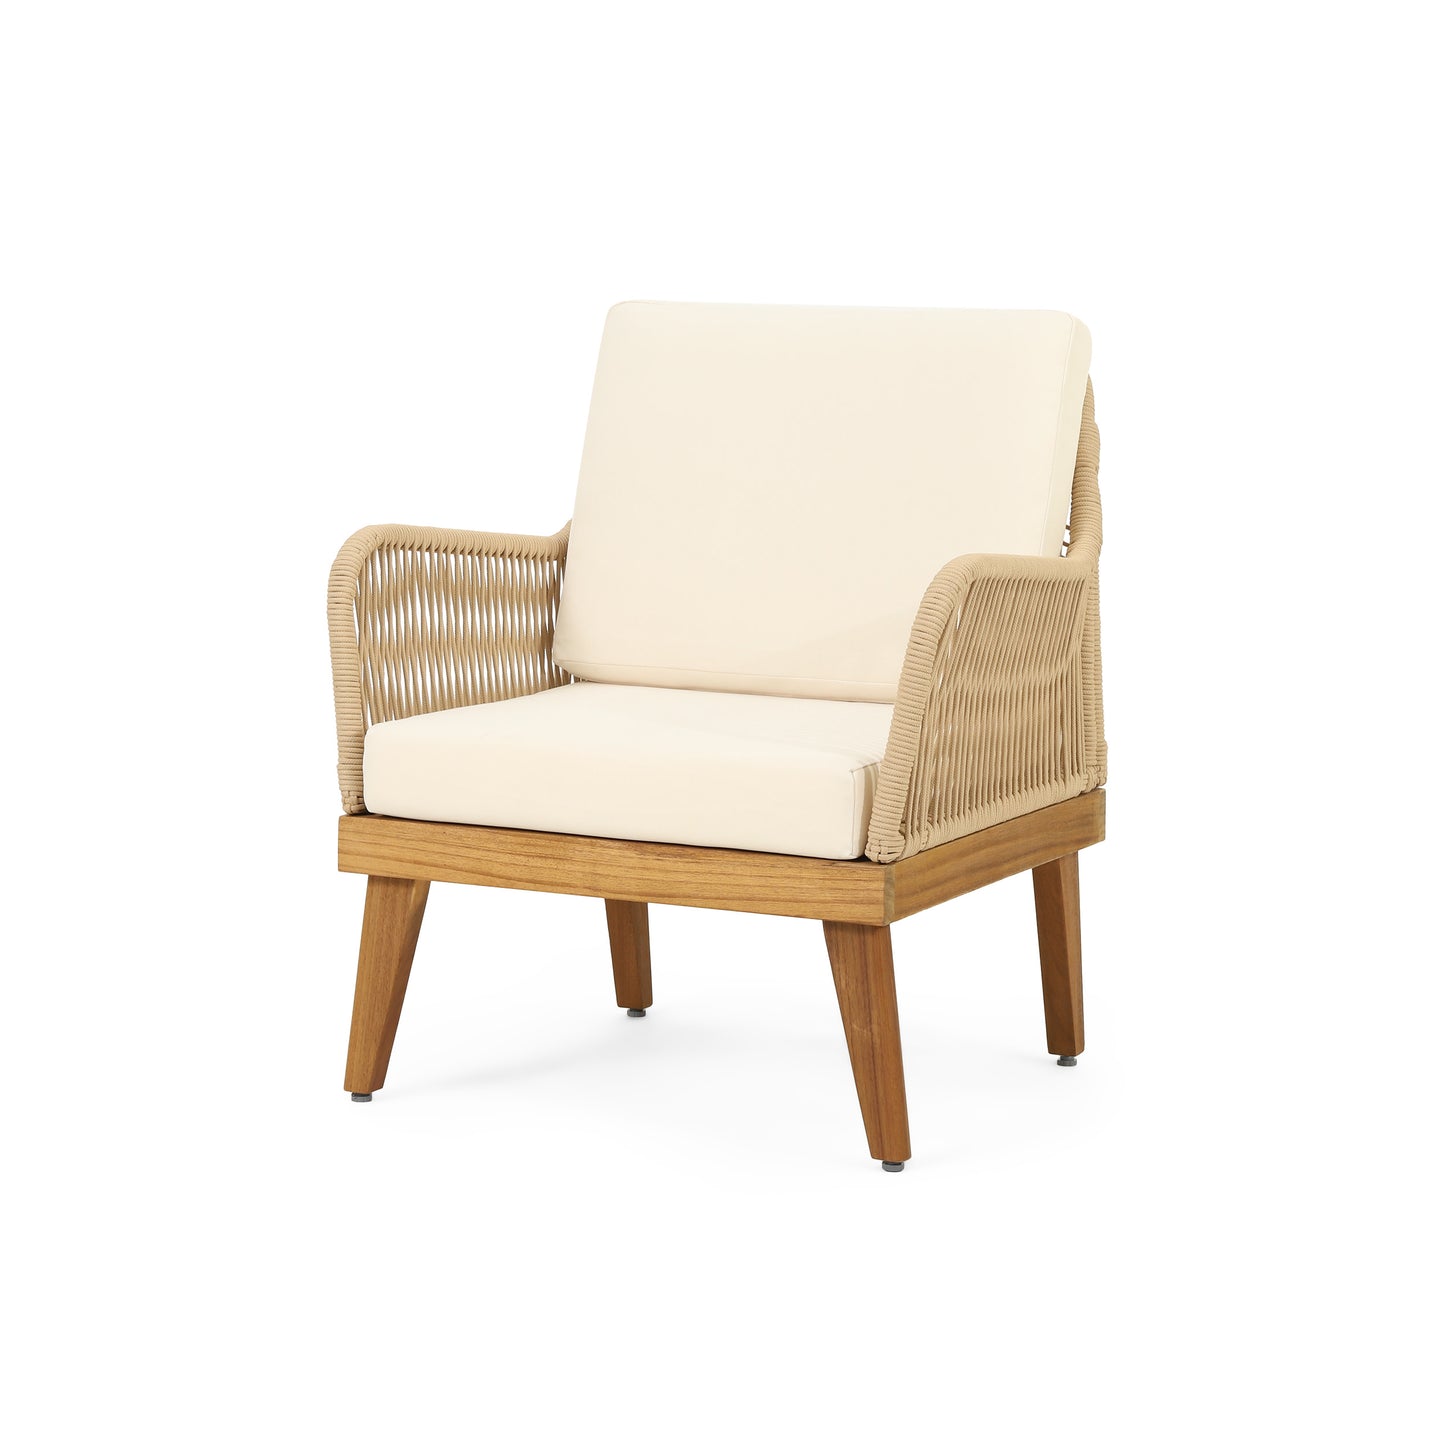 Hueber Outdoor Acacia Wood and Rope Club Chair with Cushions, Teak, Light Brown, and Beige